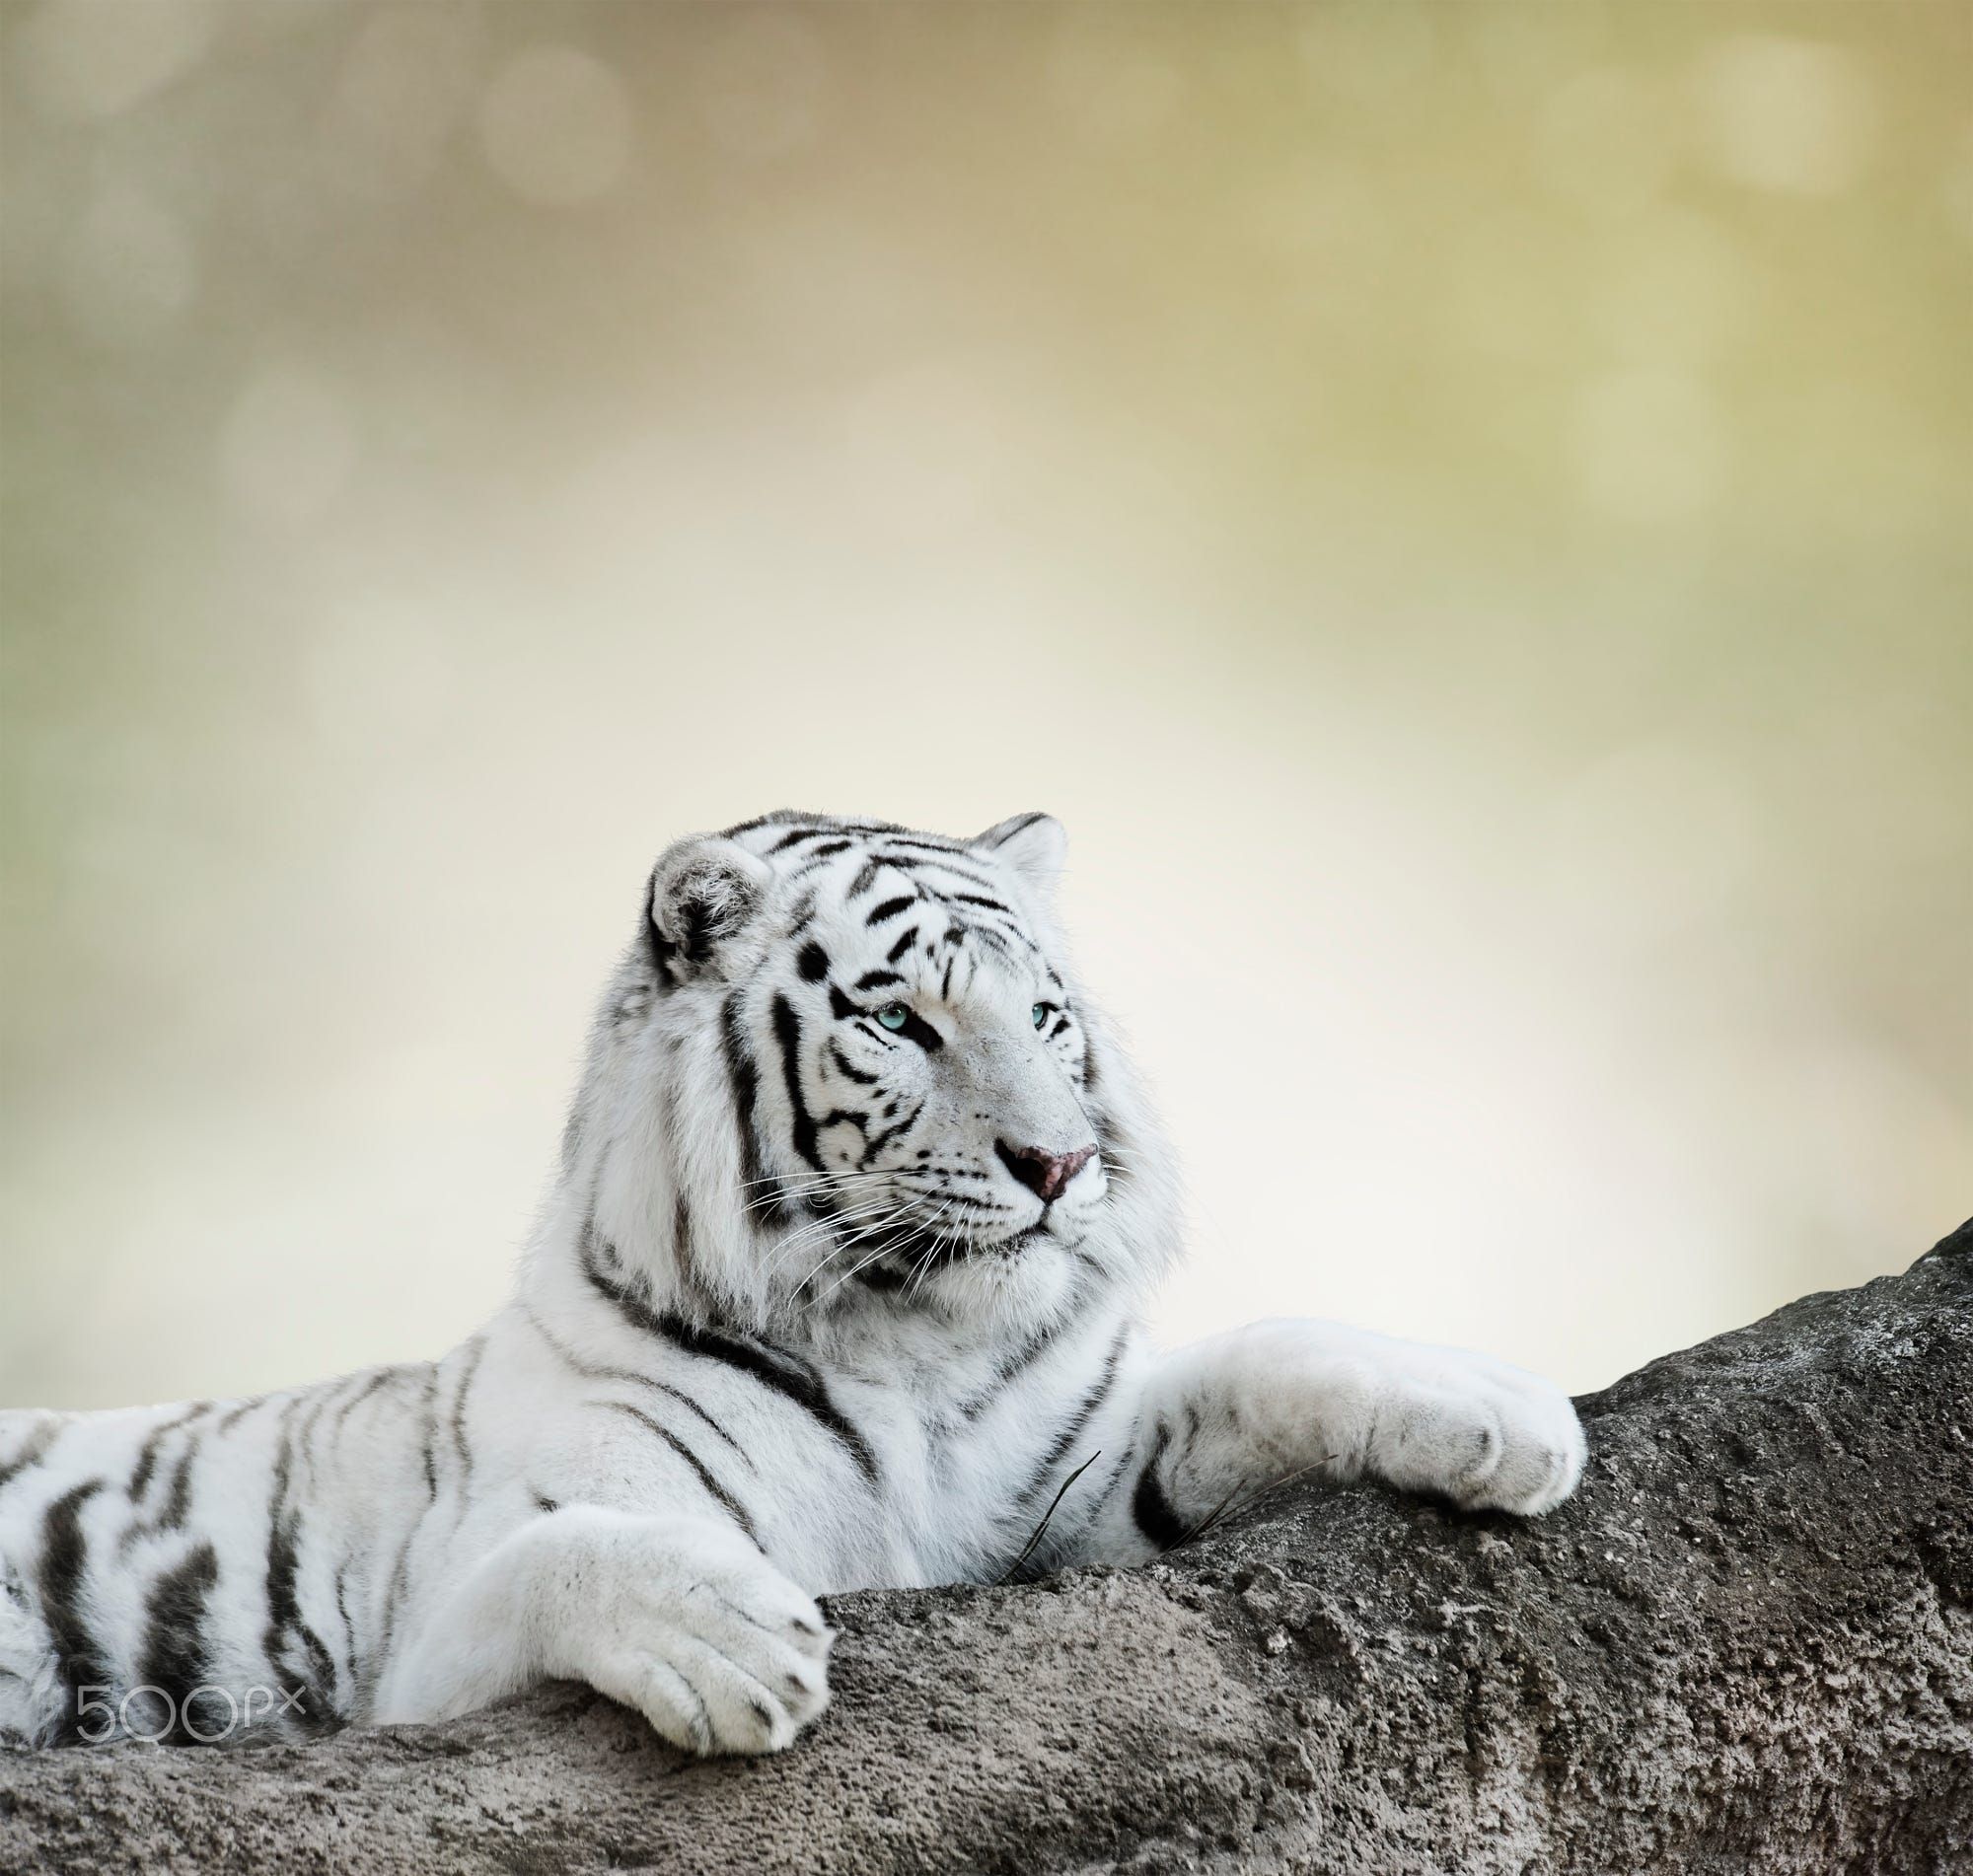 White Tiger Resting On A Rock | Good morning | Pinterest | Tigers ...